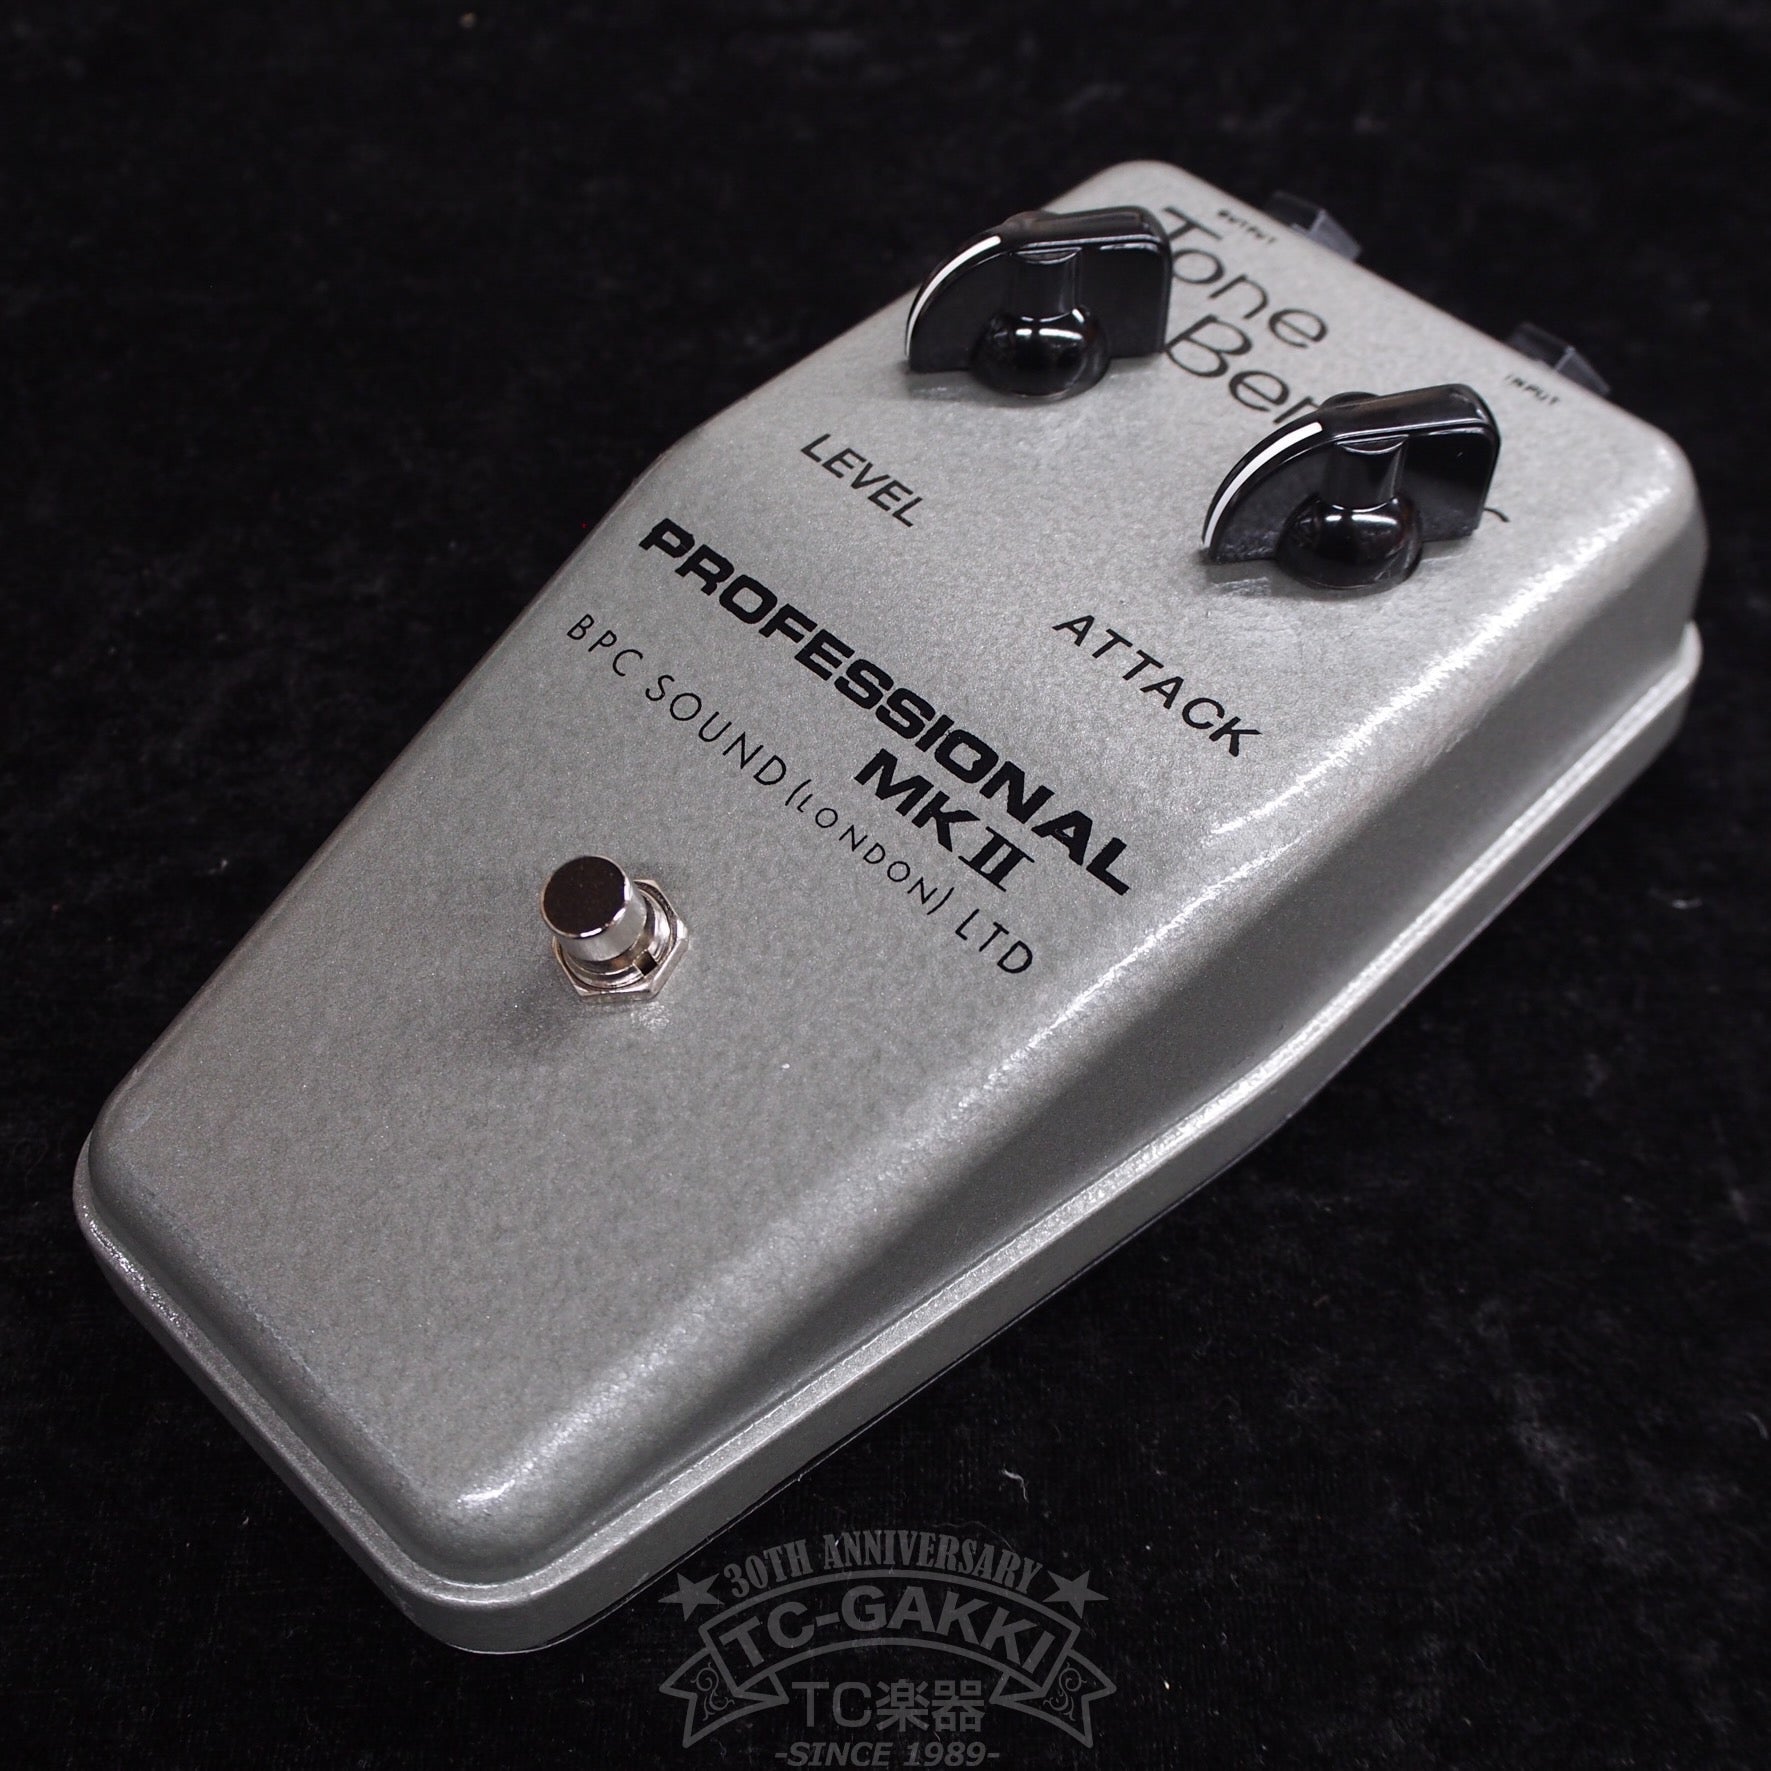 Tone Bender PROFESSIONAL MKII LIMITED PRODUCTION (OC81D)